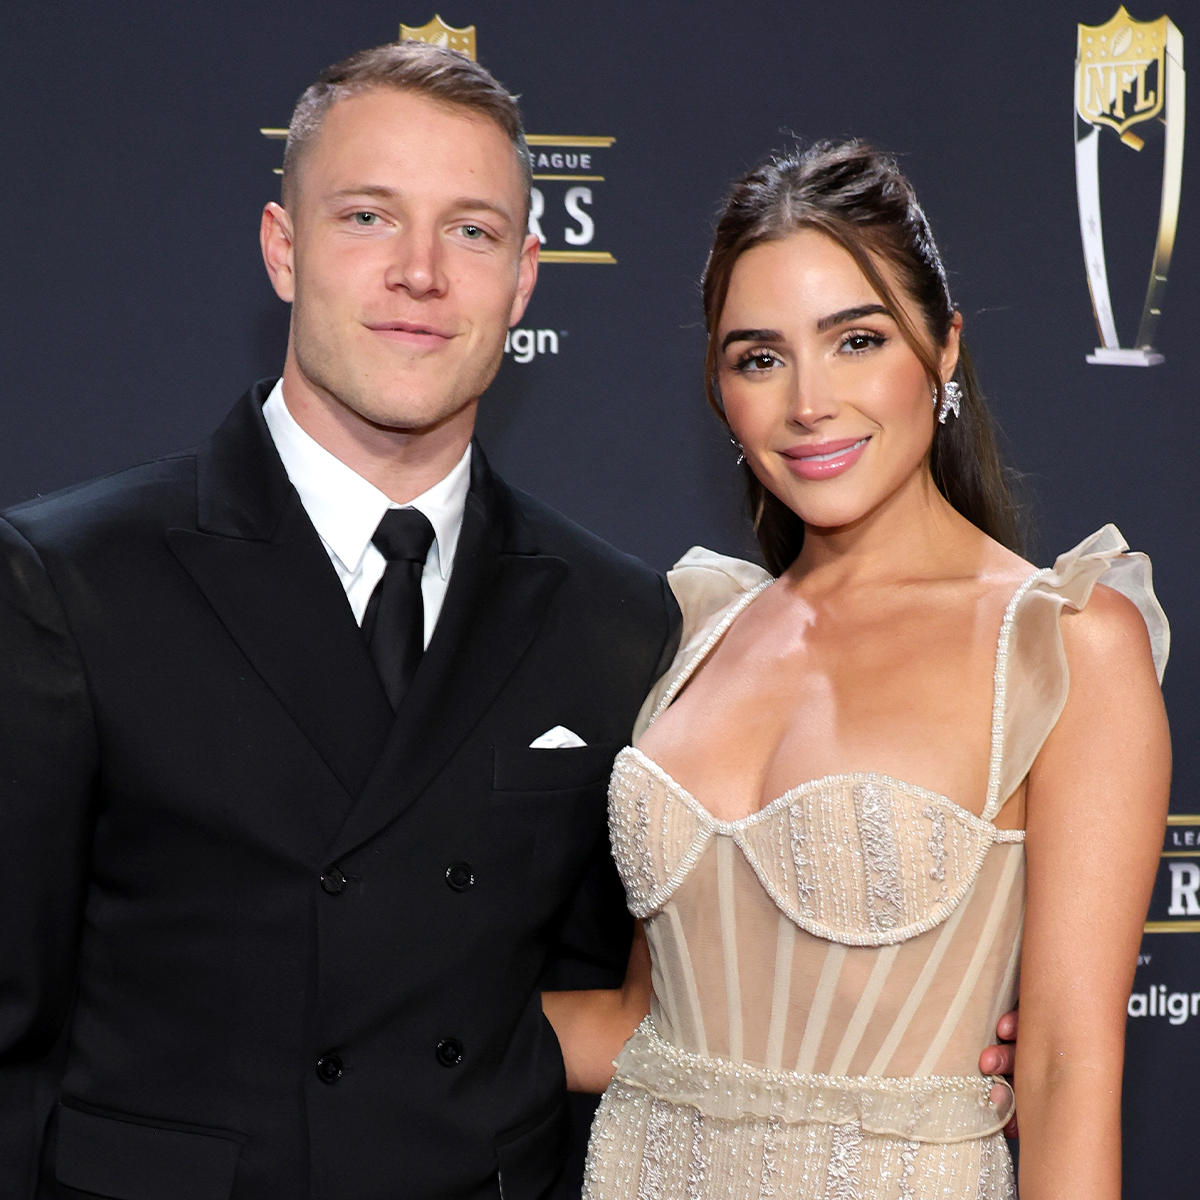 Why Olivia Culpo Is Having a “Hard” Time Designing Her Wedding Dress